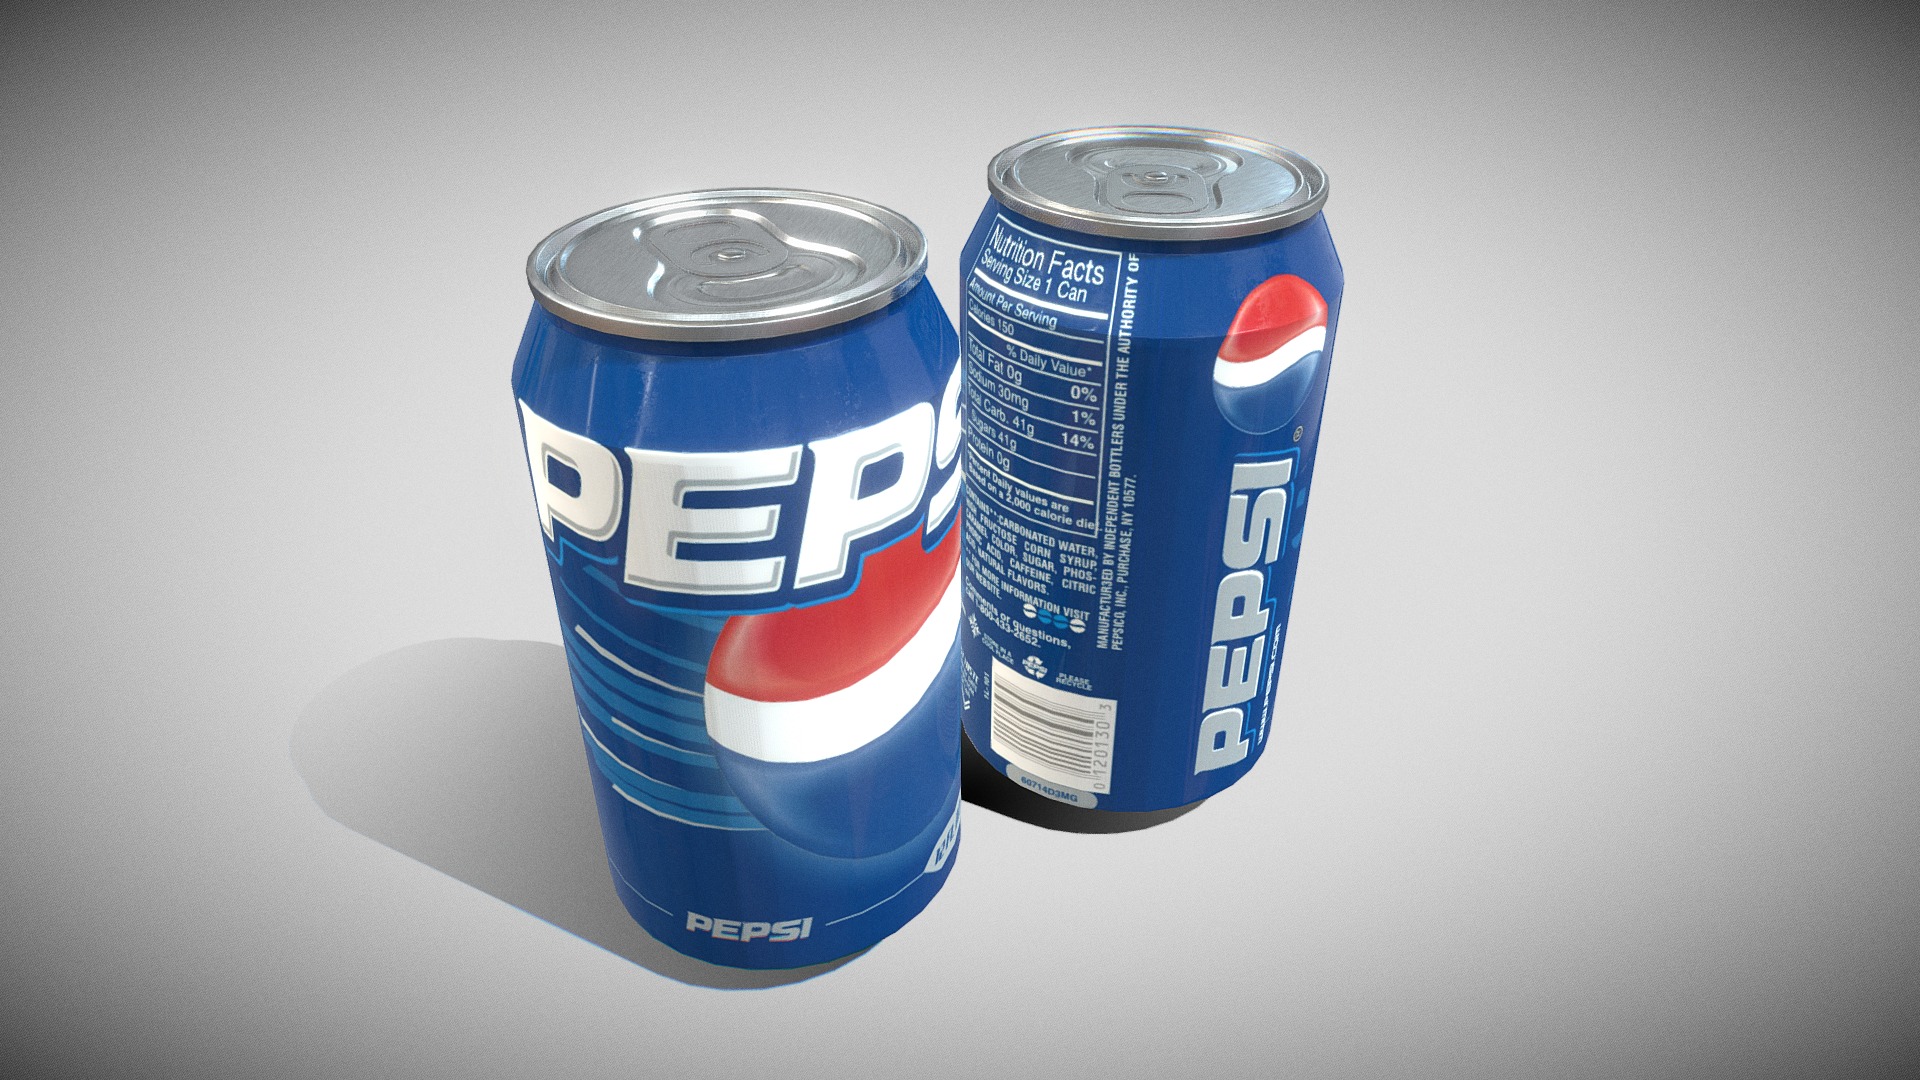 3D model Pepsi Colddrink Cans - This is a 3D model of the Pepsi Colddrink Cans. The 3D model is about two cans of energy drink.